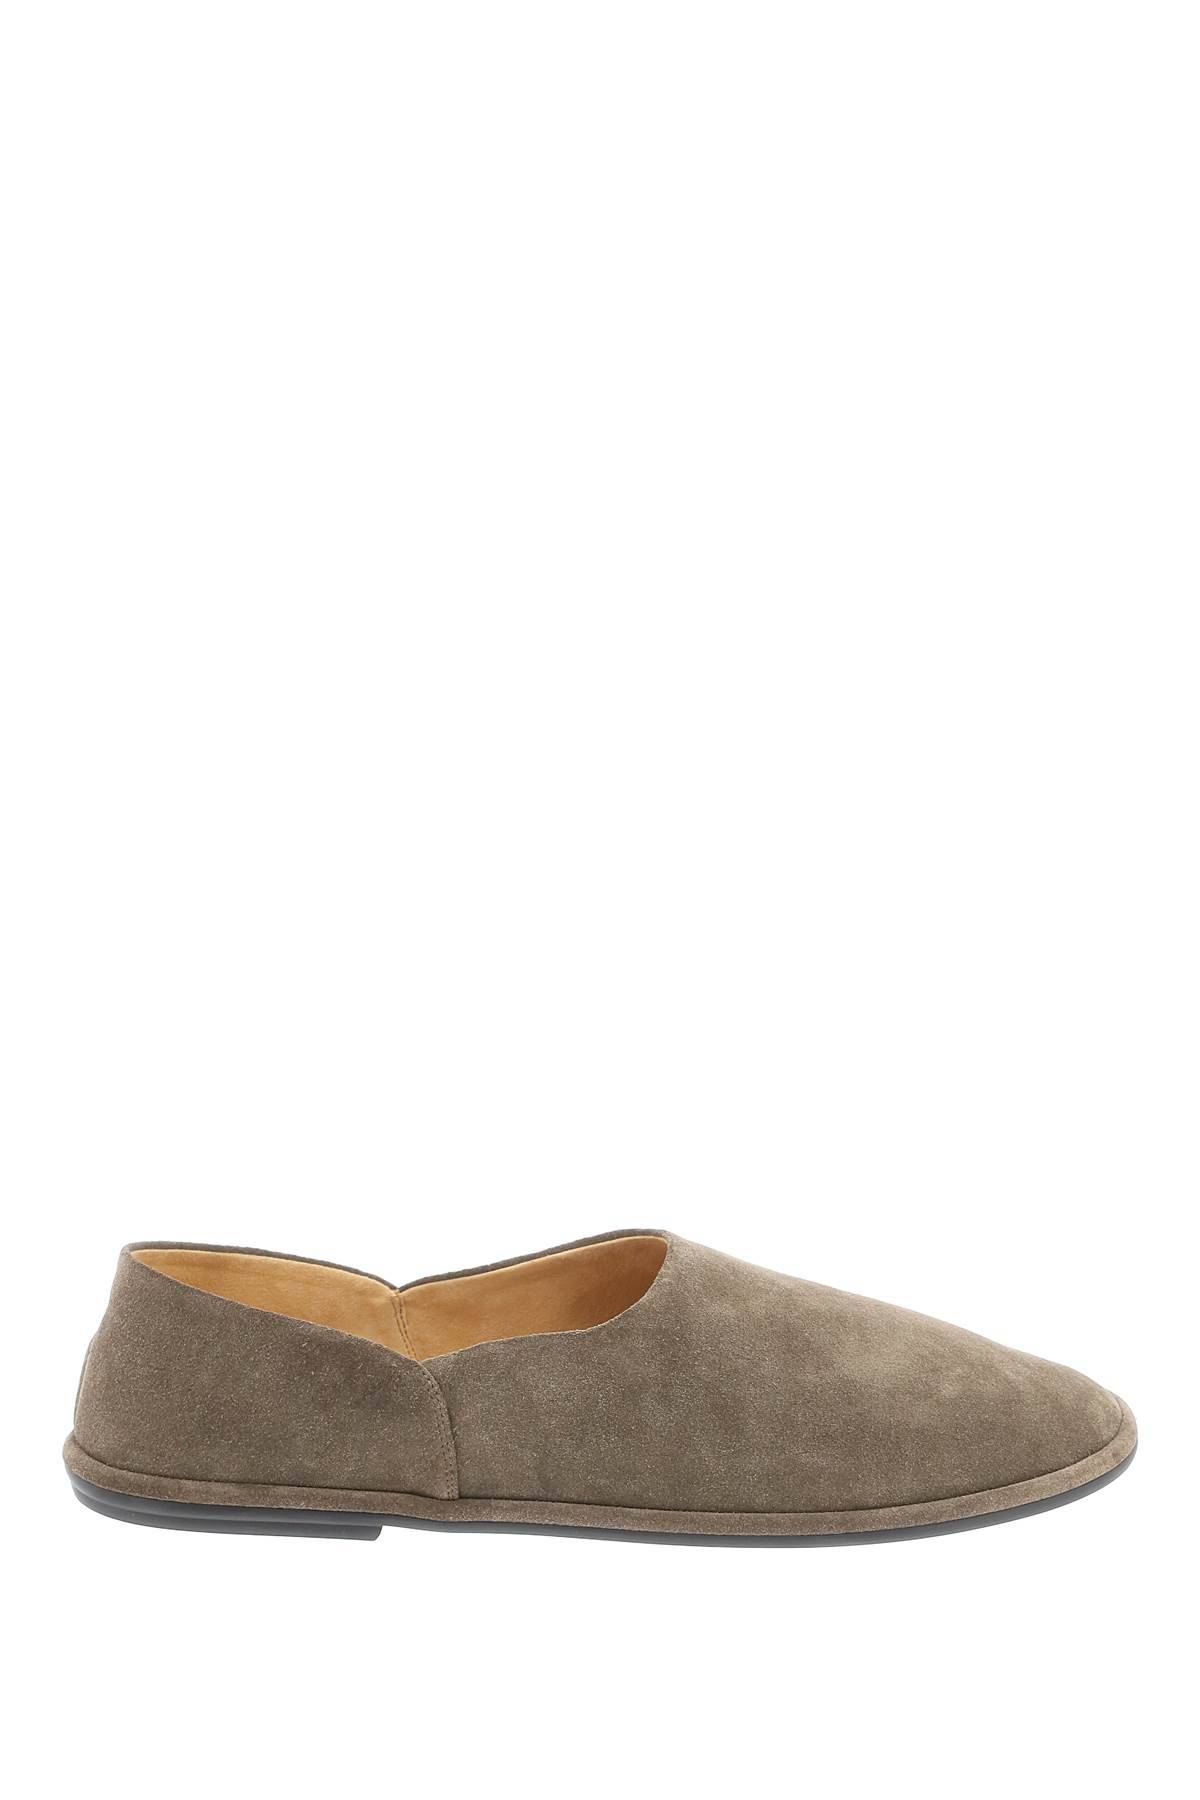 The Row Suede Canal Slip-on In Khaki